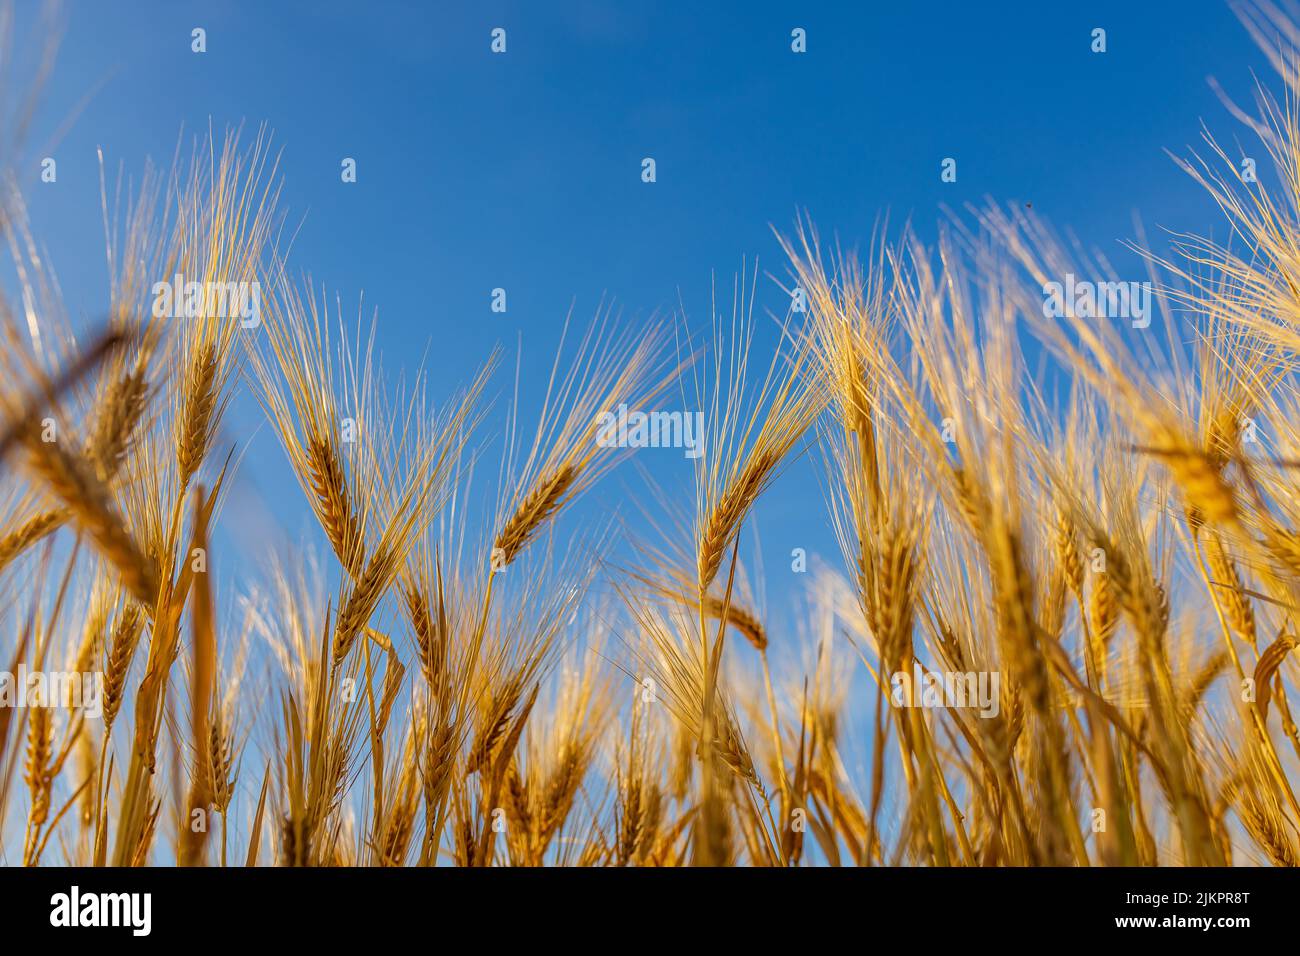 Yellow agriculture field with ripe wheat and blue sky Stock Photo